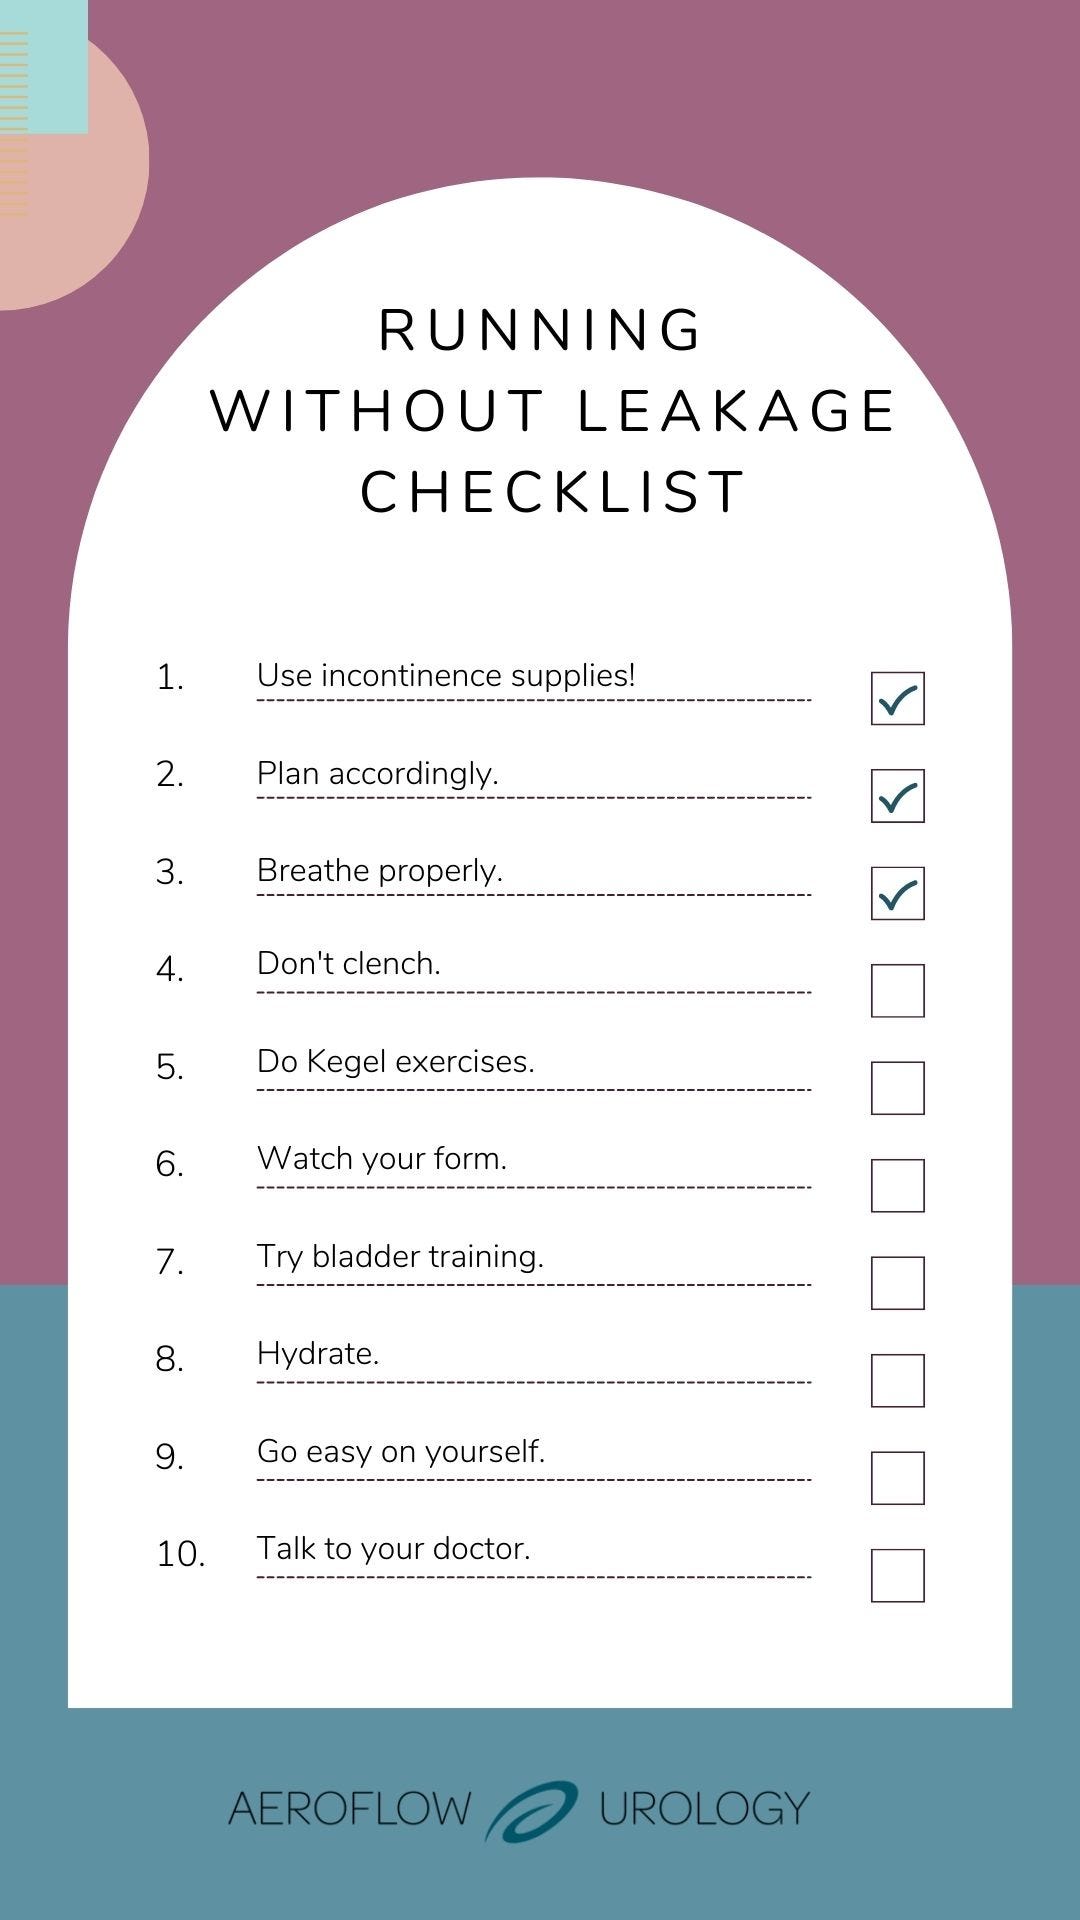 Running without peeing checklist